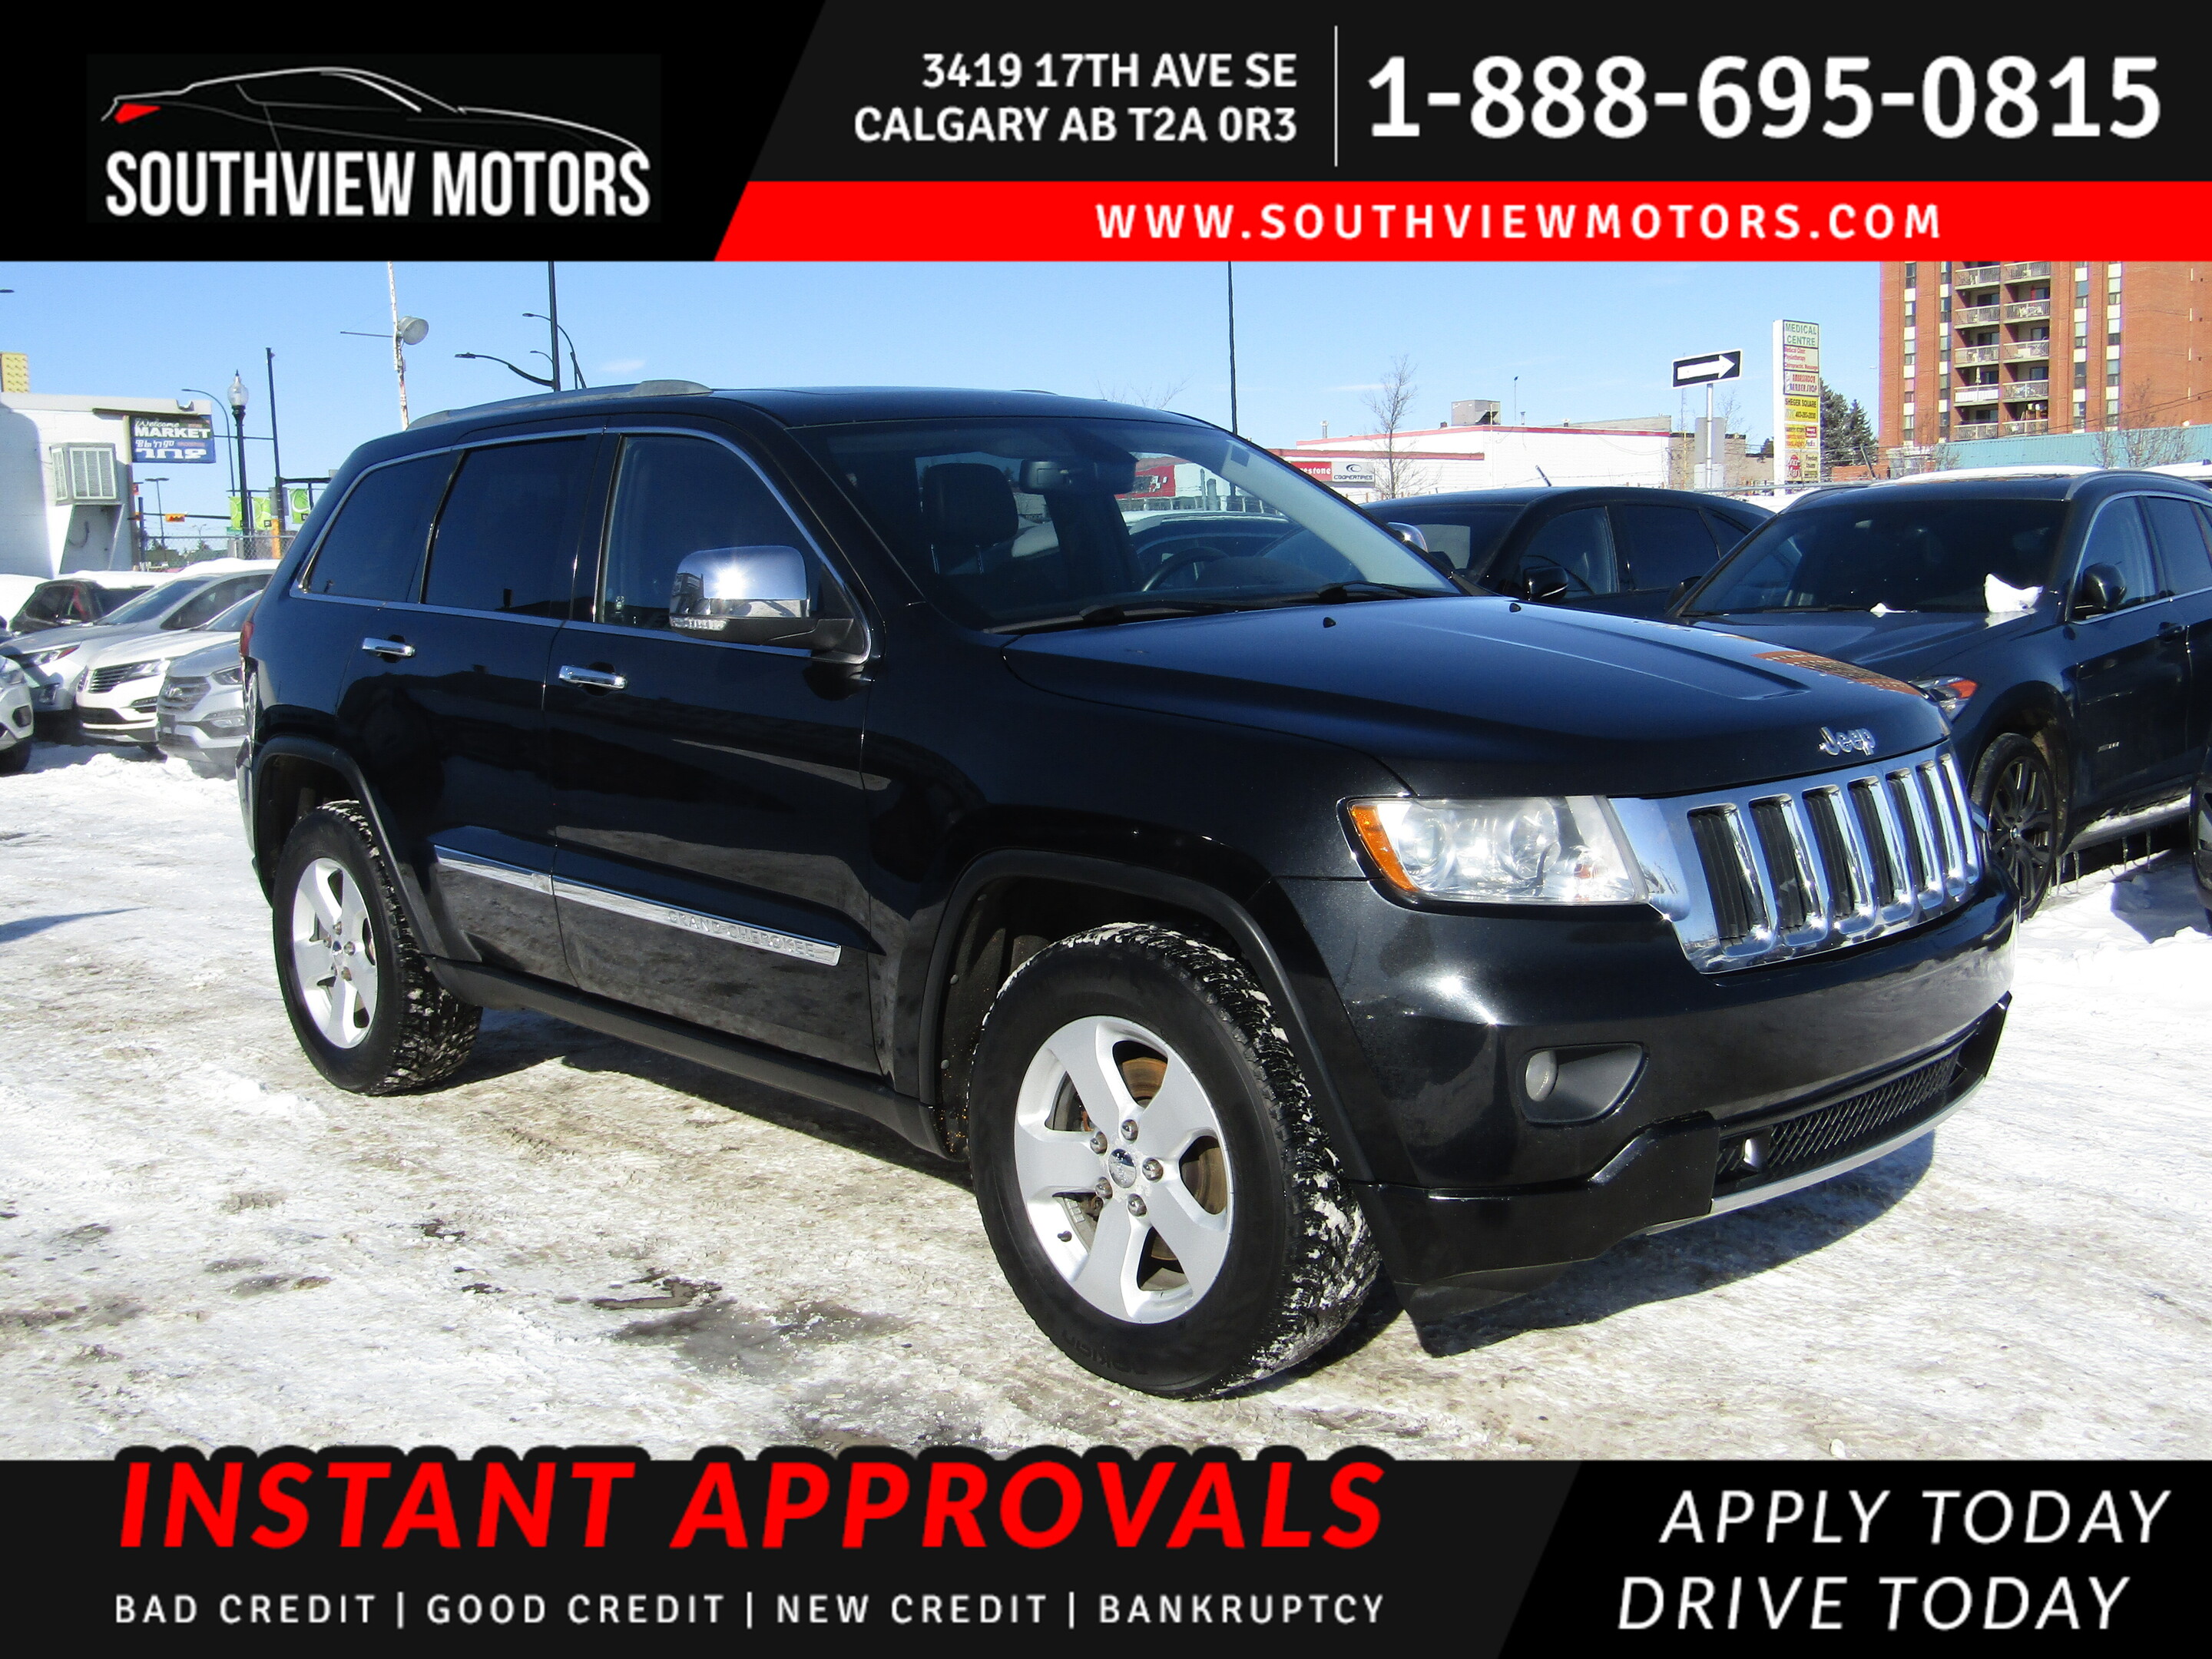 2012 Jeep Grand Cherokee LIMITED 4WD V6 3.6L NAV/B.CAM/ROOF/LEATHER 